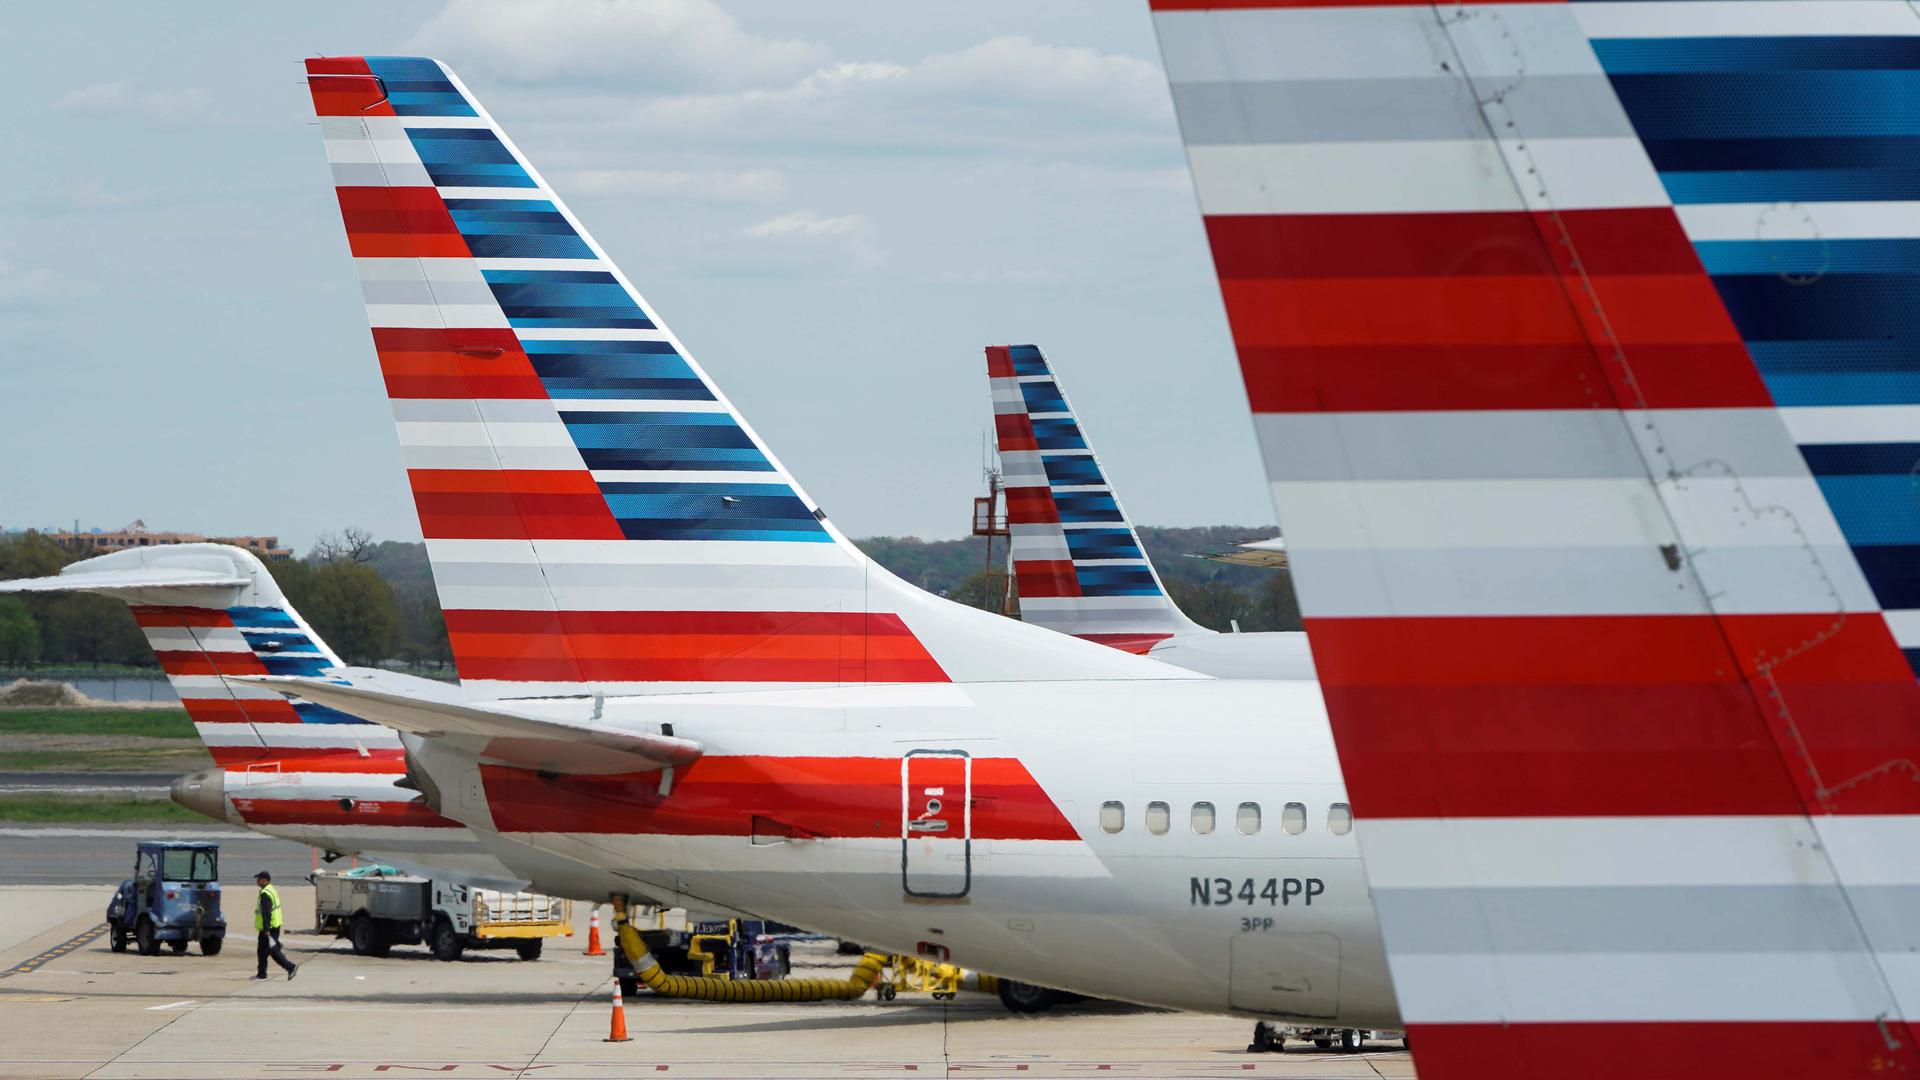 A member of a ground crew walks past American Airlines planes parked at the gate during the coronavirus disease (COVID-19) outbreak at Ronald Reagan National Airport in Washington, DC, April 5, 2020.